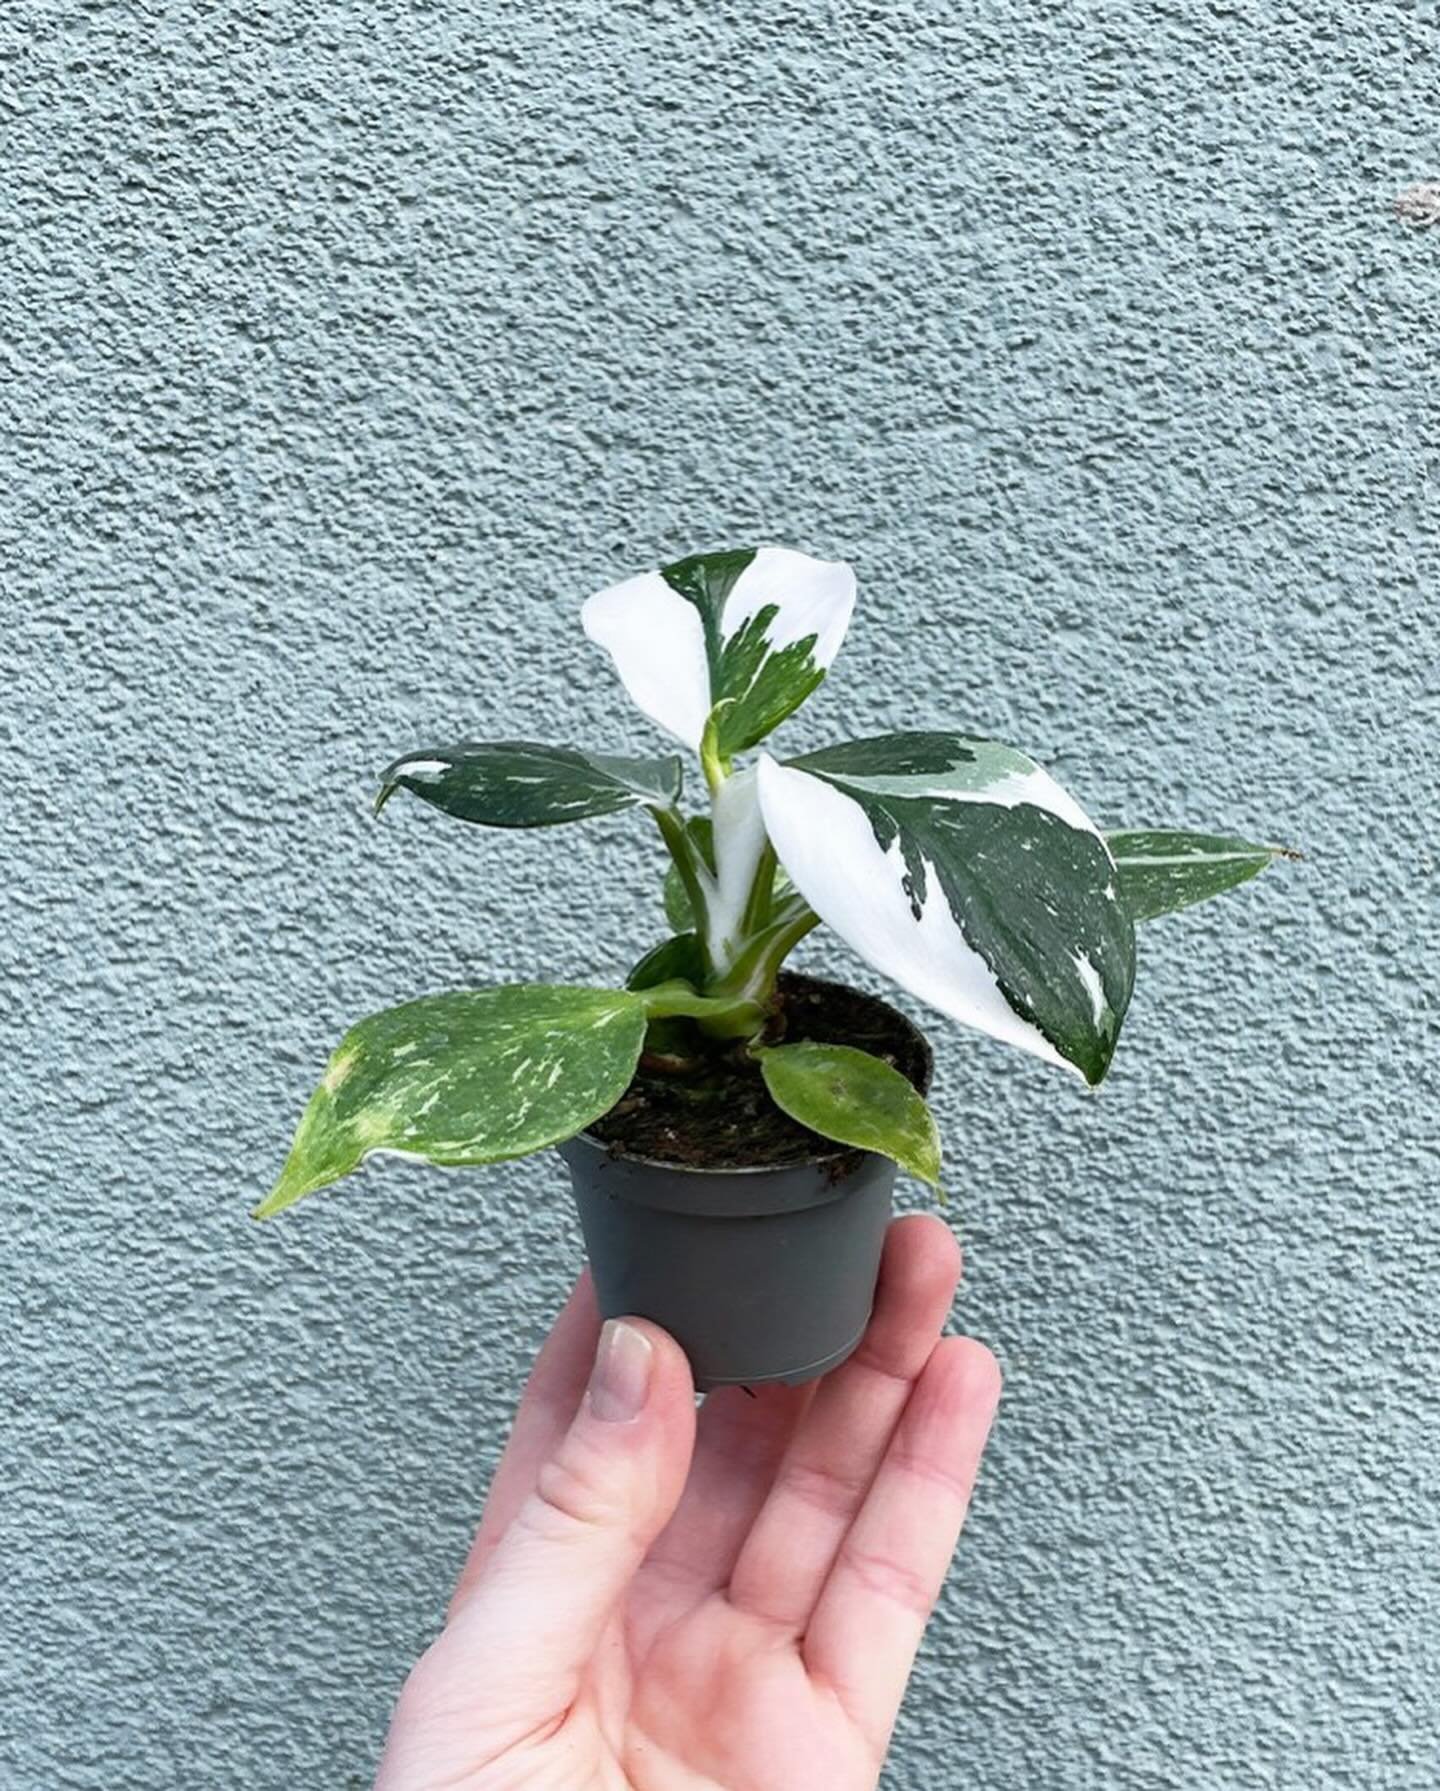 Who wants one saving? 
Baby philodendron white princesses are in.